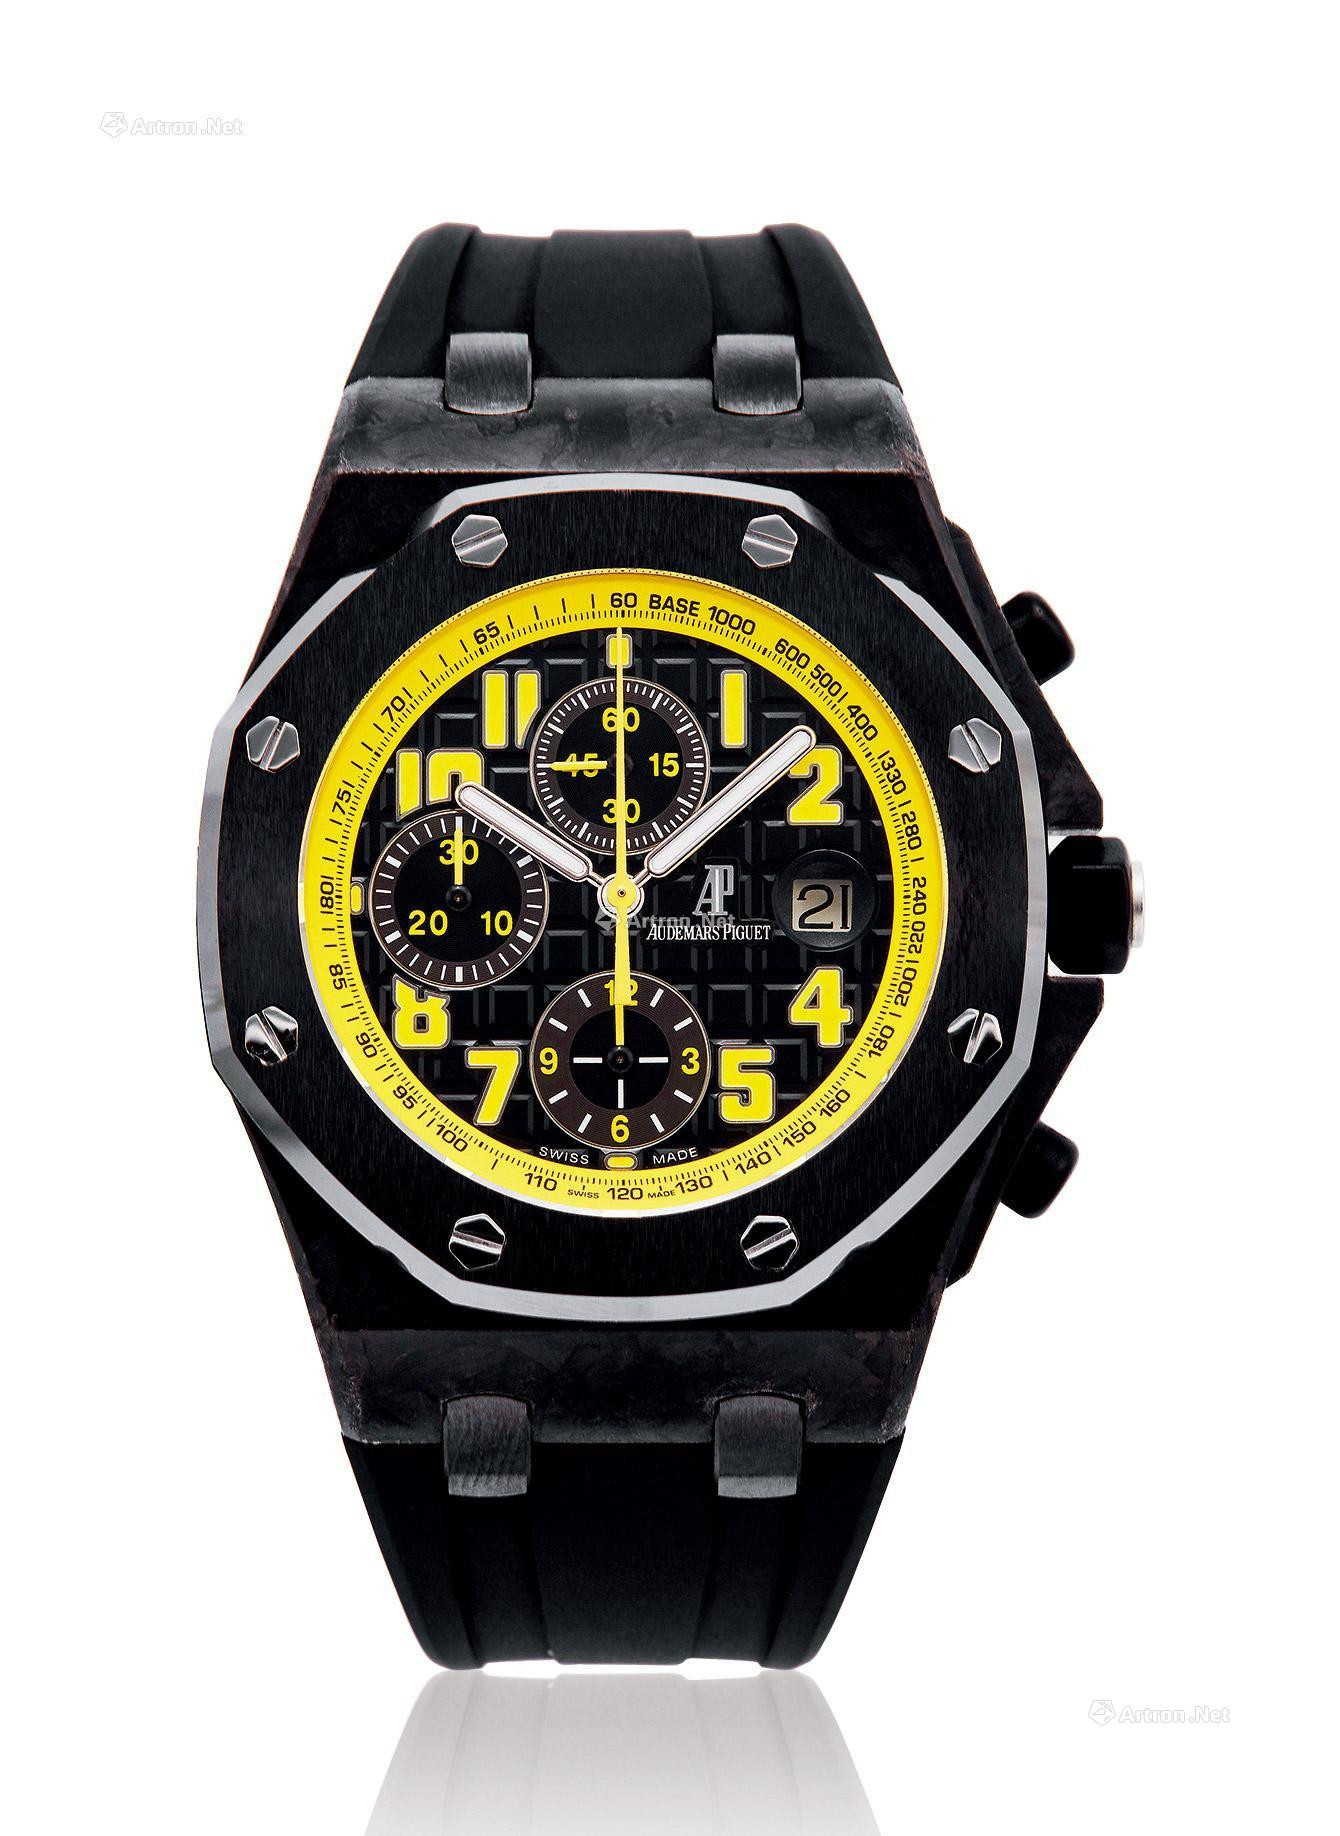 AUDEMARS PIGUET A TITANIUM CHRONOGRAPH MANUALLY-WOUND WRISTWATCH WITH DATE AND SECOND INDICATION